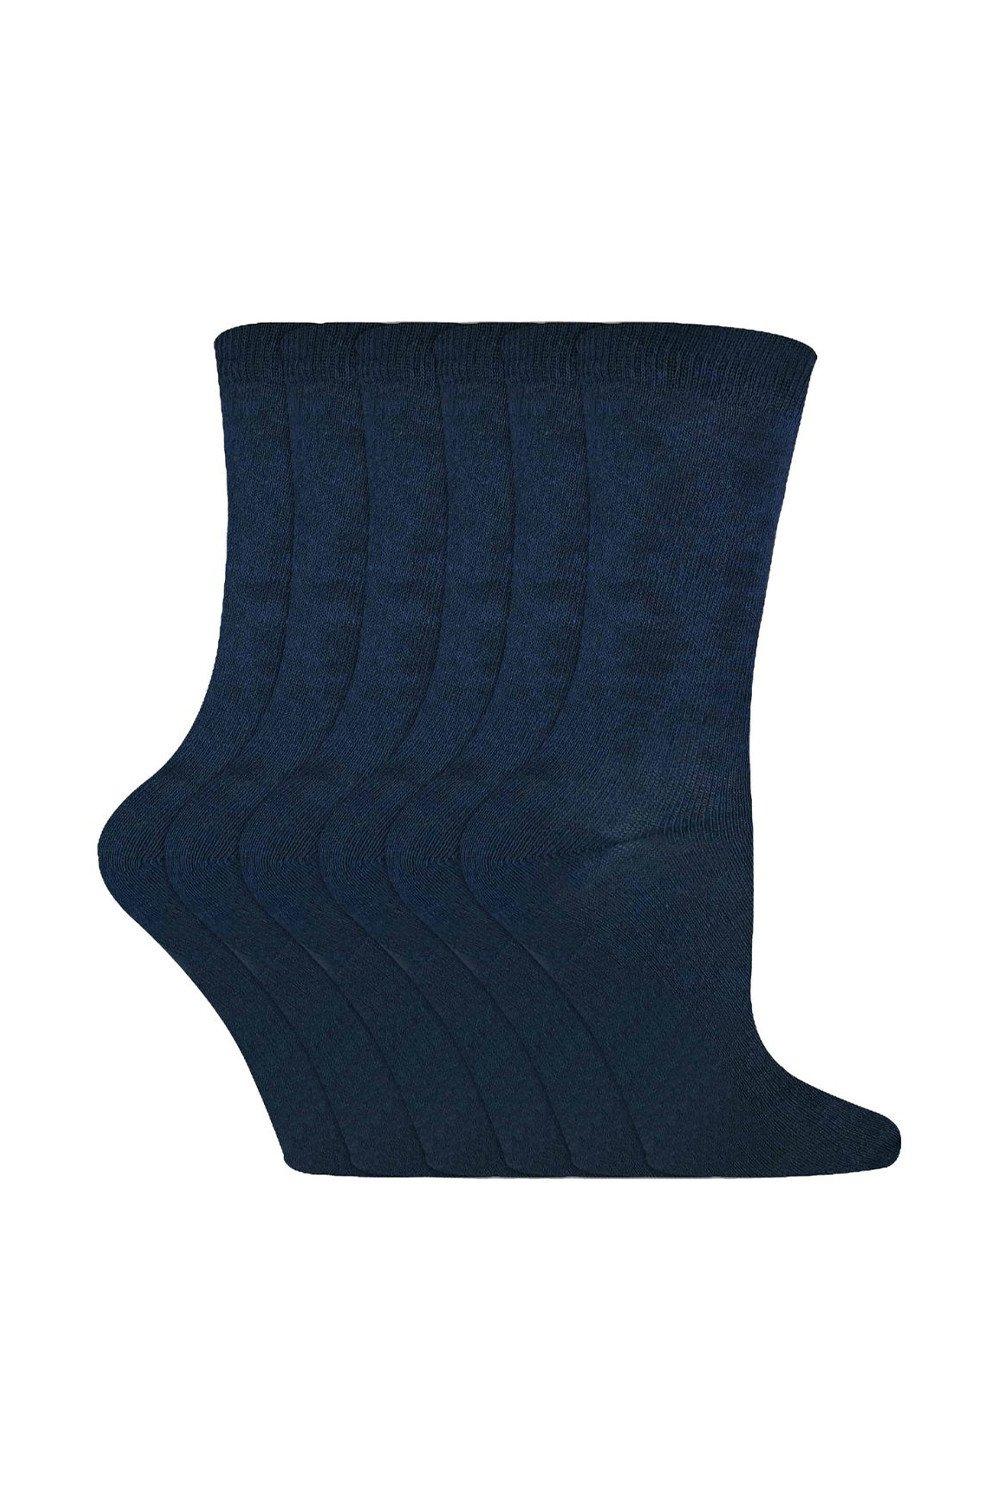 6 Pairs Solid Colour Casual Cotton Dress Socks